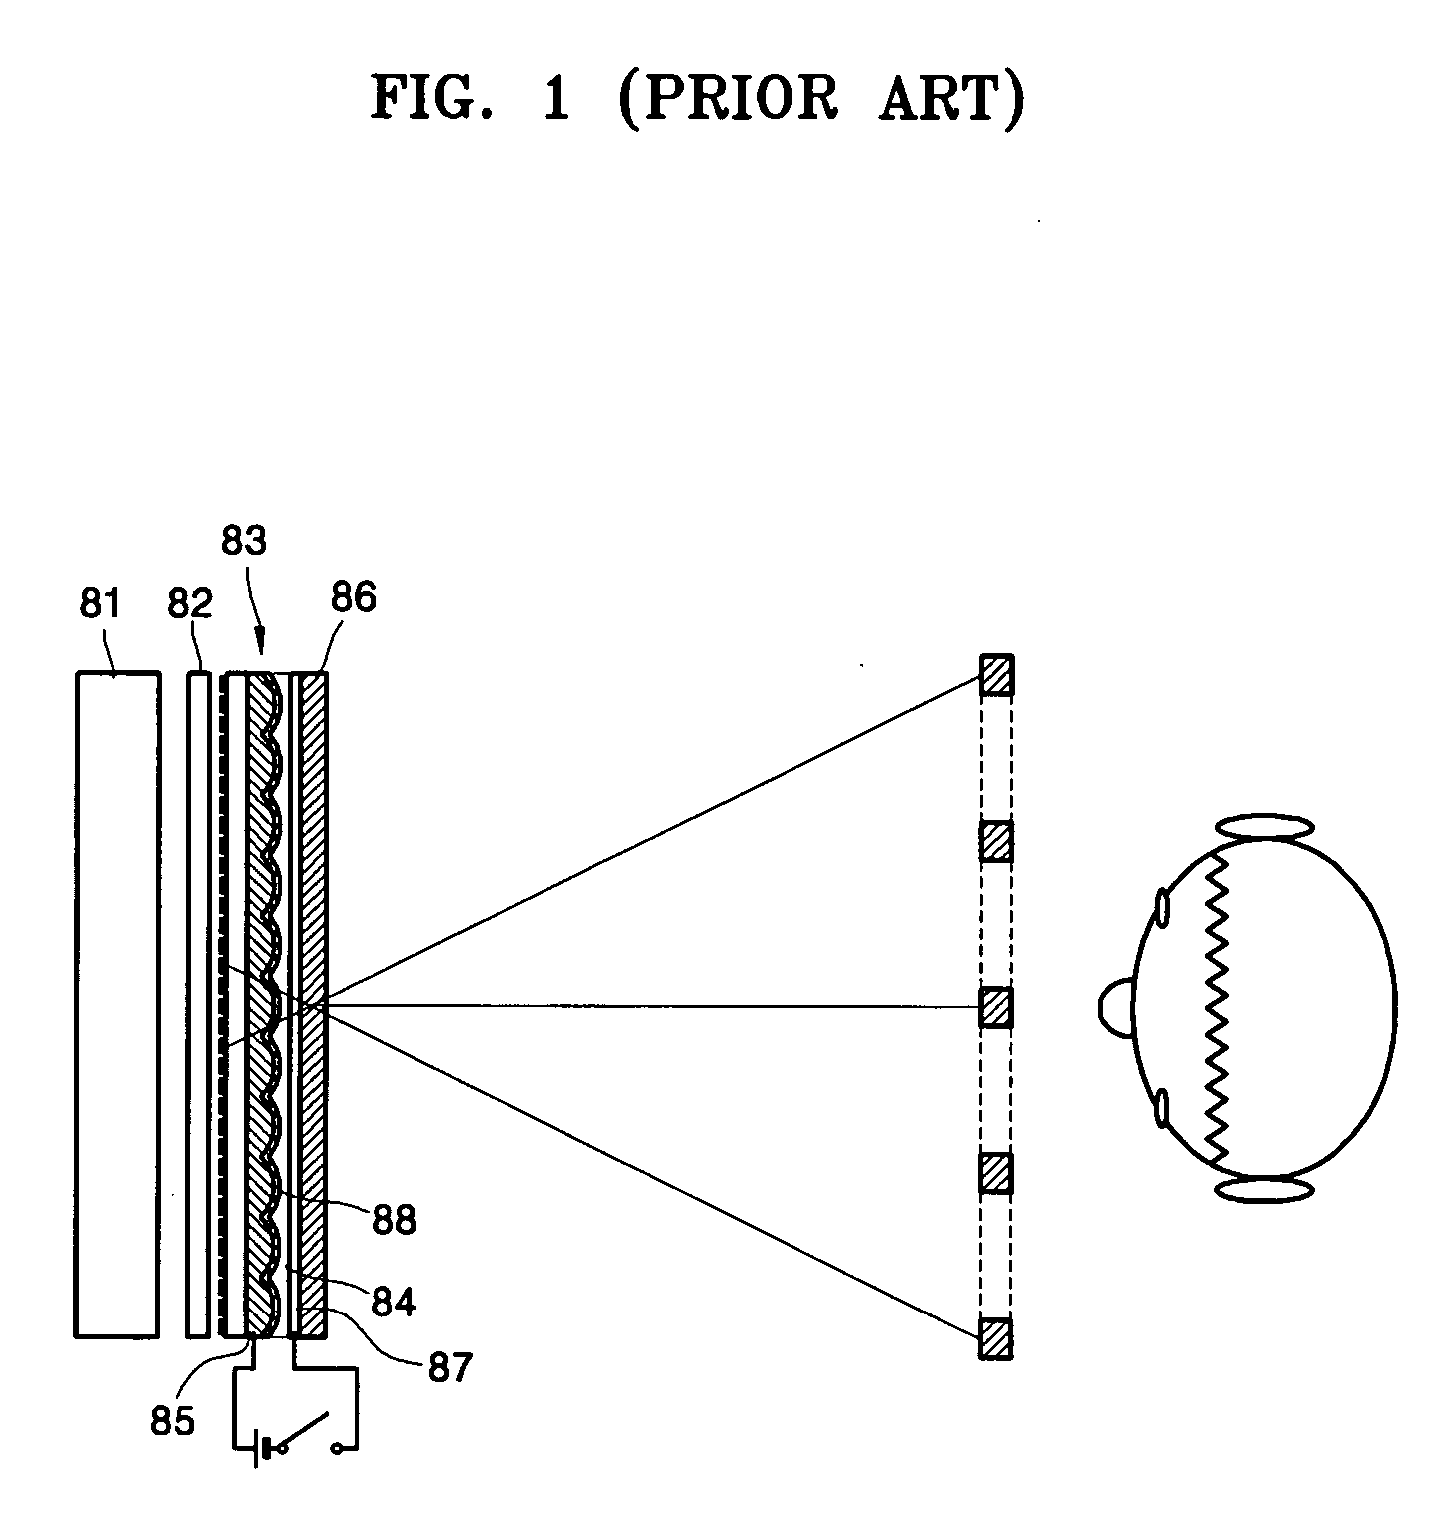 2D-3D switchable autostereoscopic display apparatus